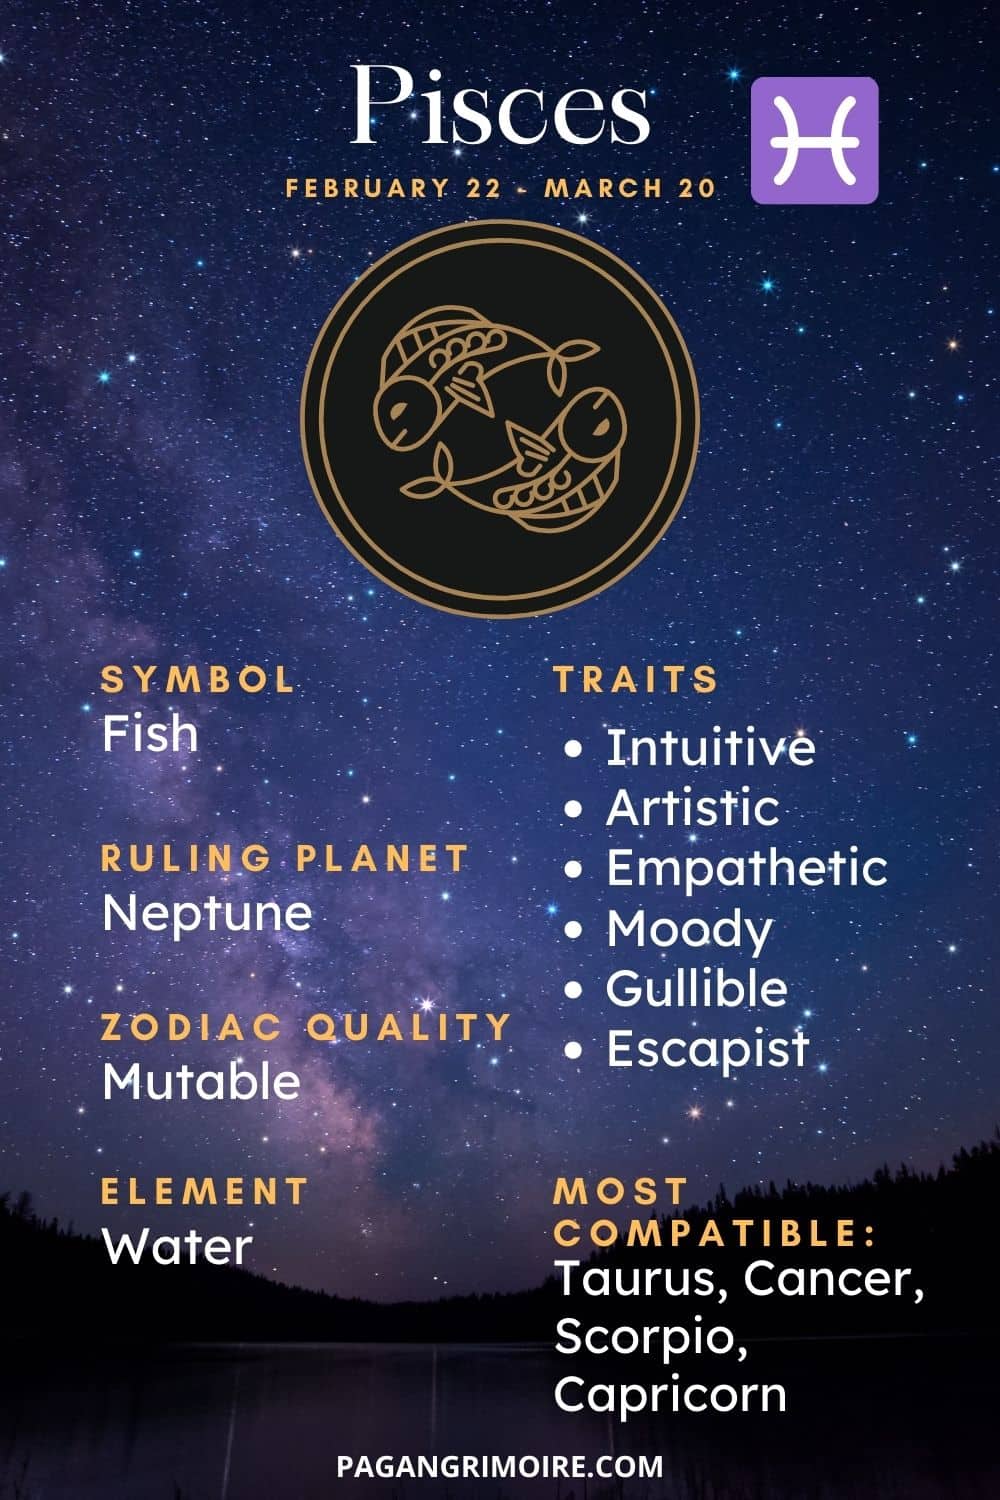 What element is a Pisces?